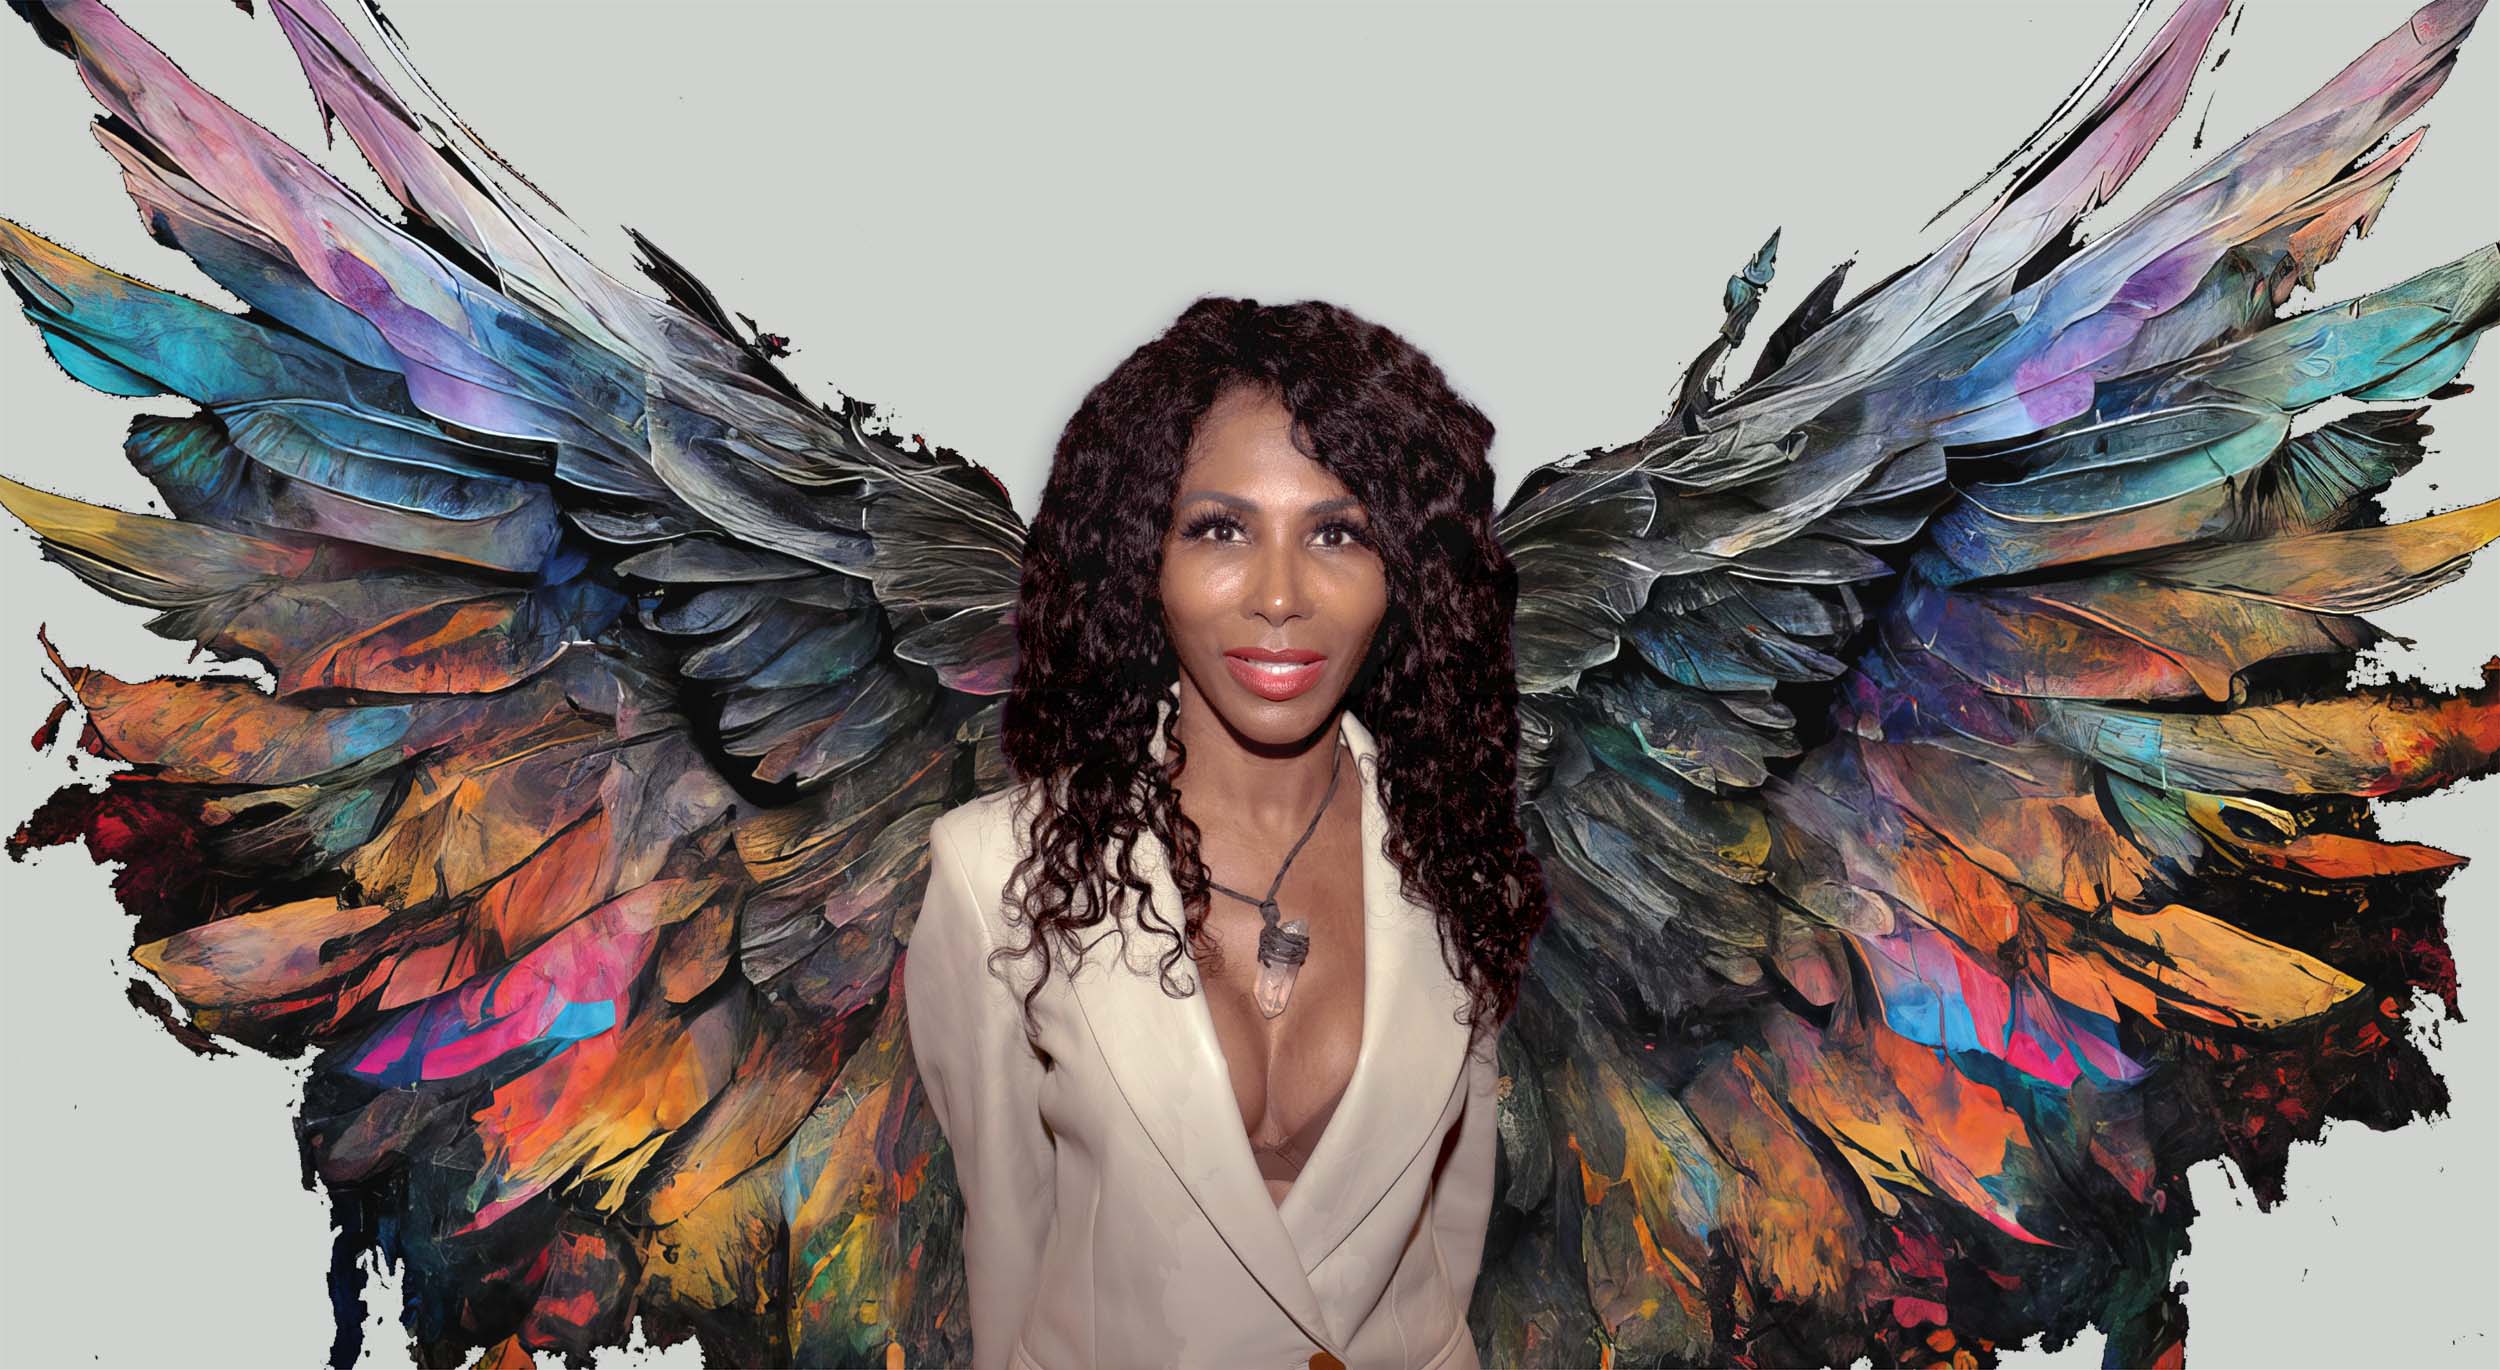 sinitta stood in front of colourful angel wings